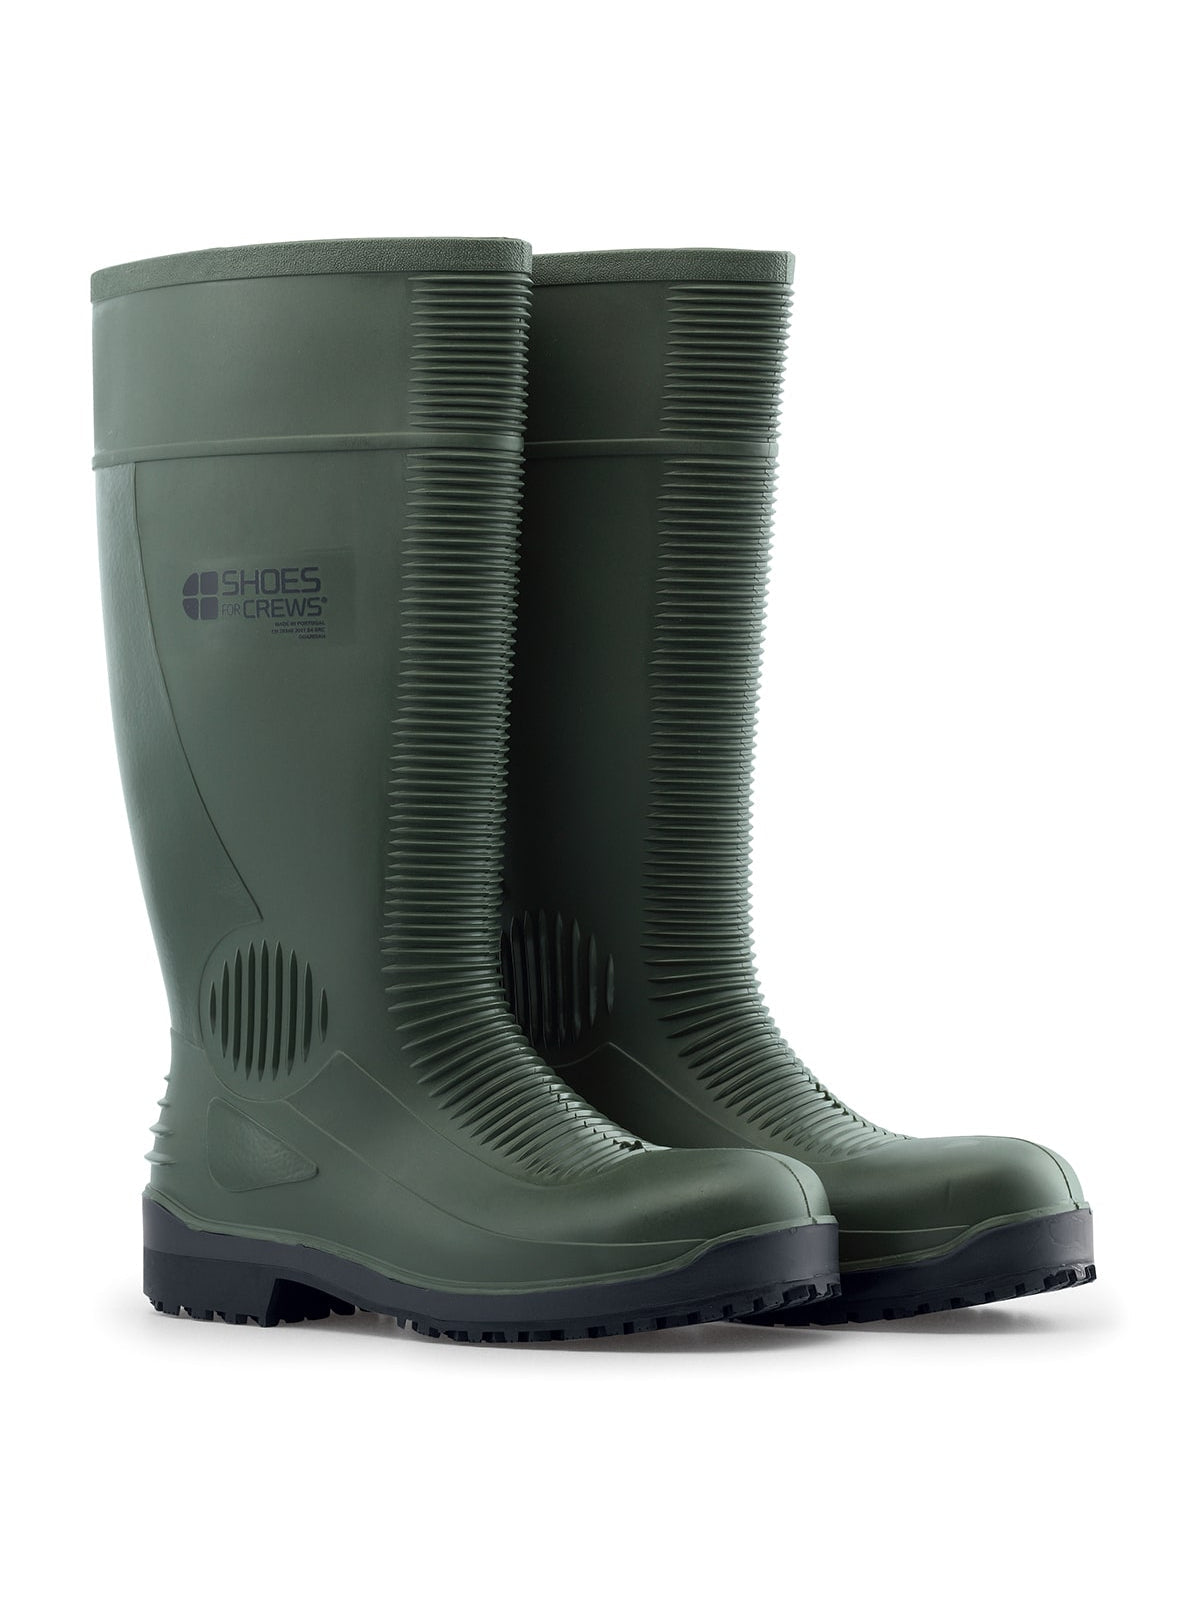 Unisex Safety Boot Guardian Green (S4) by Shoes For Crews -  ChefsCotton